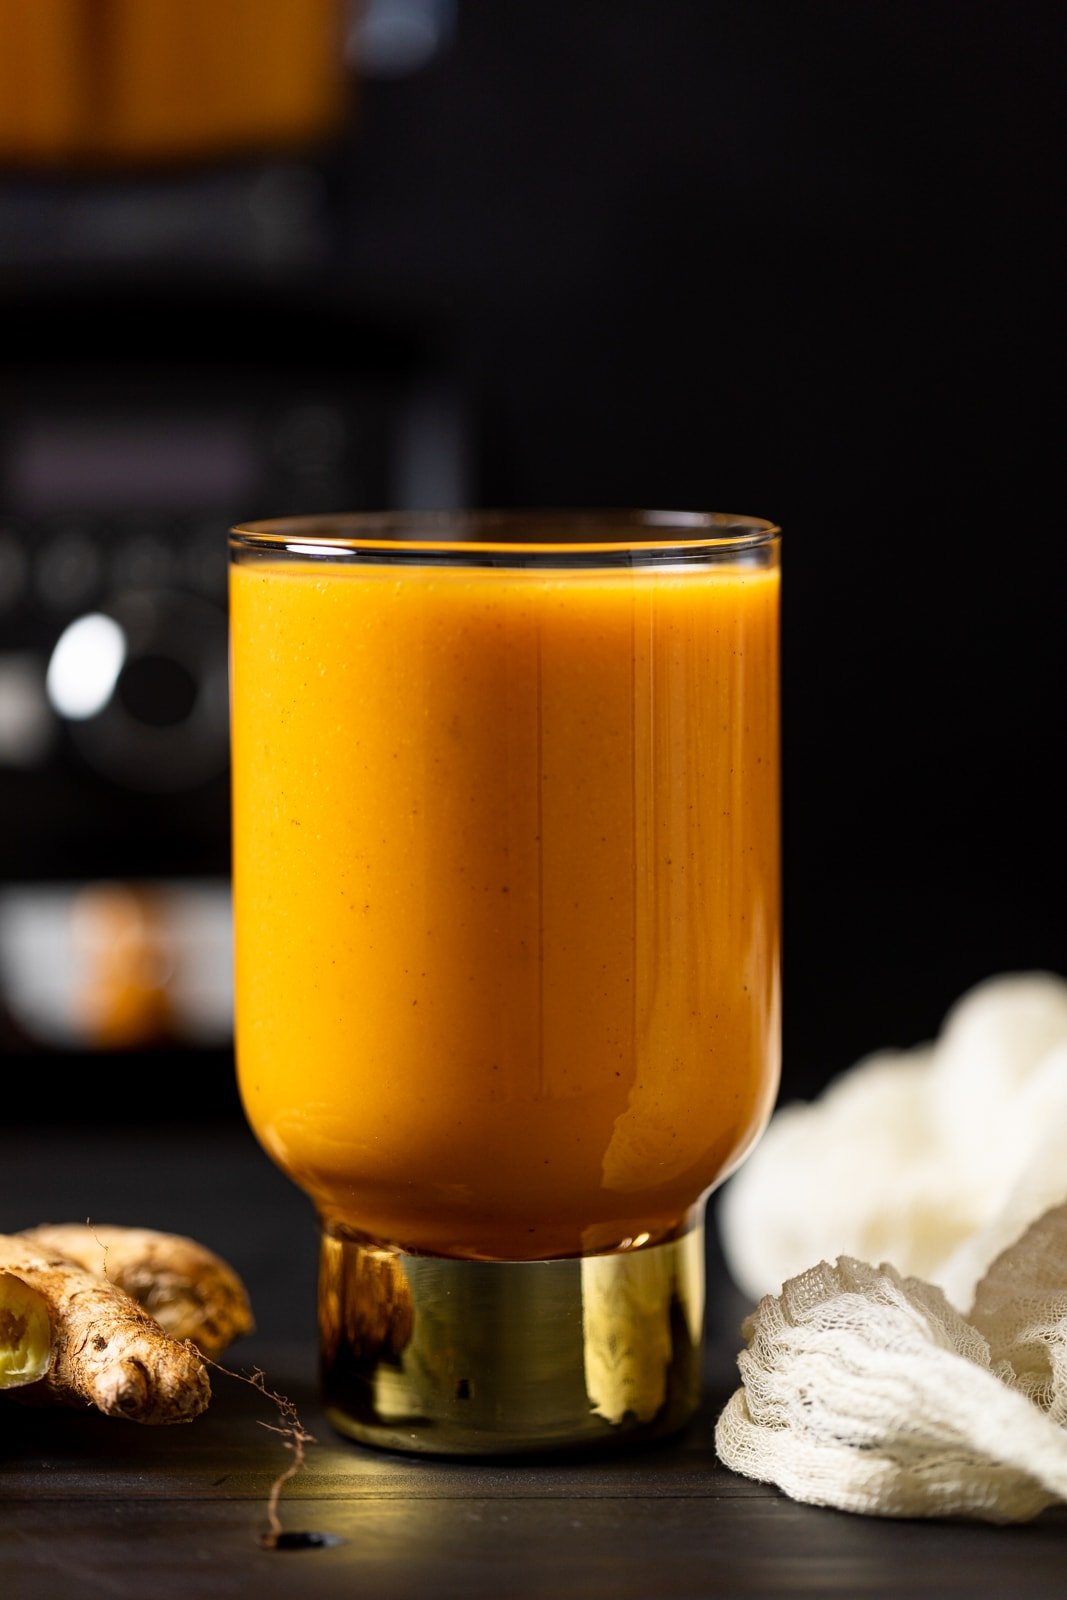 Vegan Jamaican Carrot Juice in a small glass with a golden base on a table with ginger